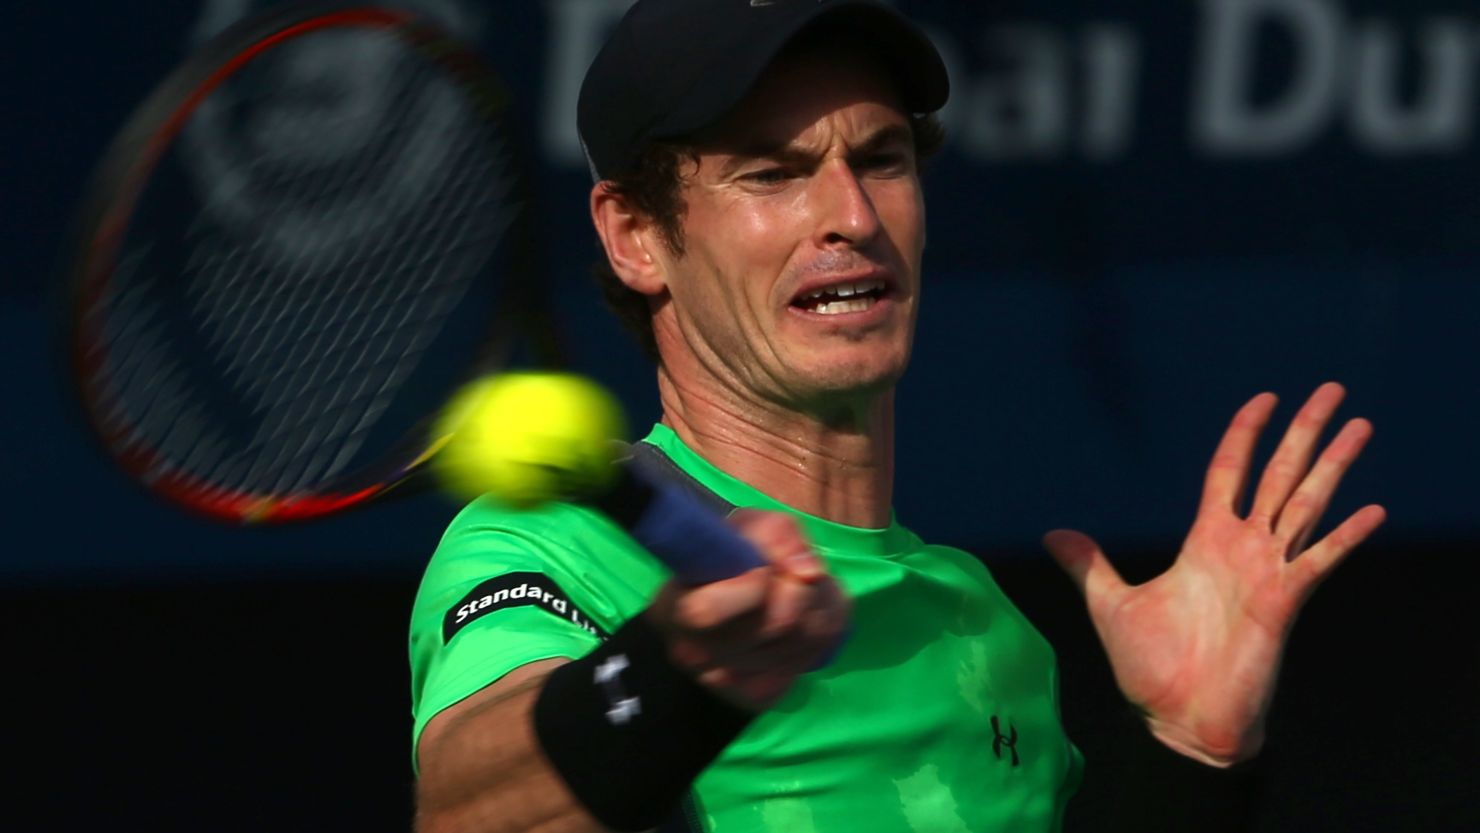 Andy Murray struggled for any sort of rhythm during his thoroughly one-sided defeat by Borna Coric.